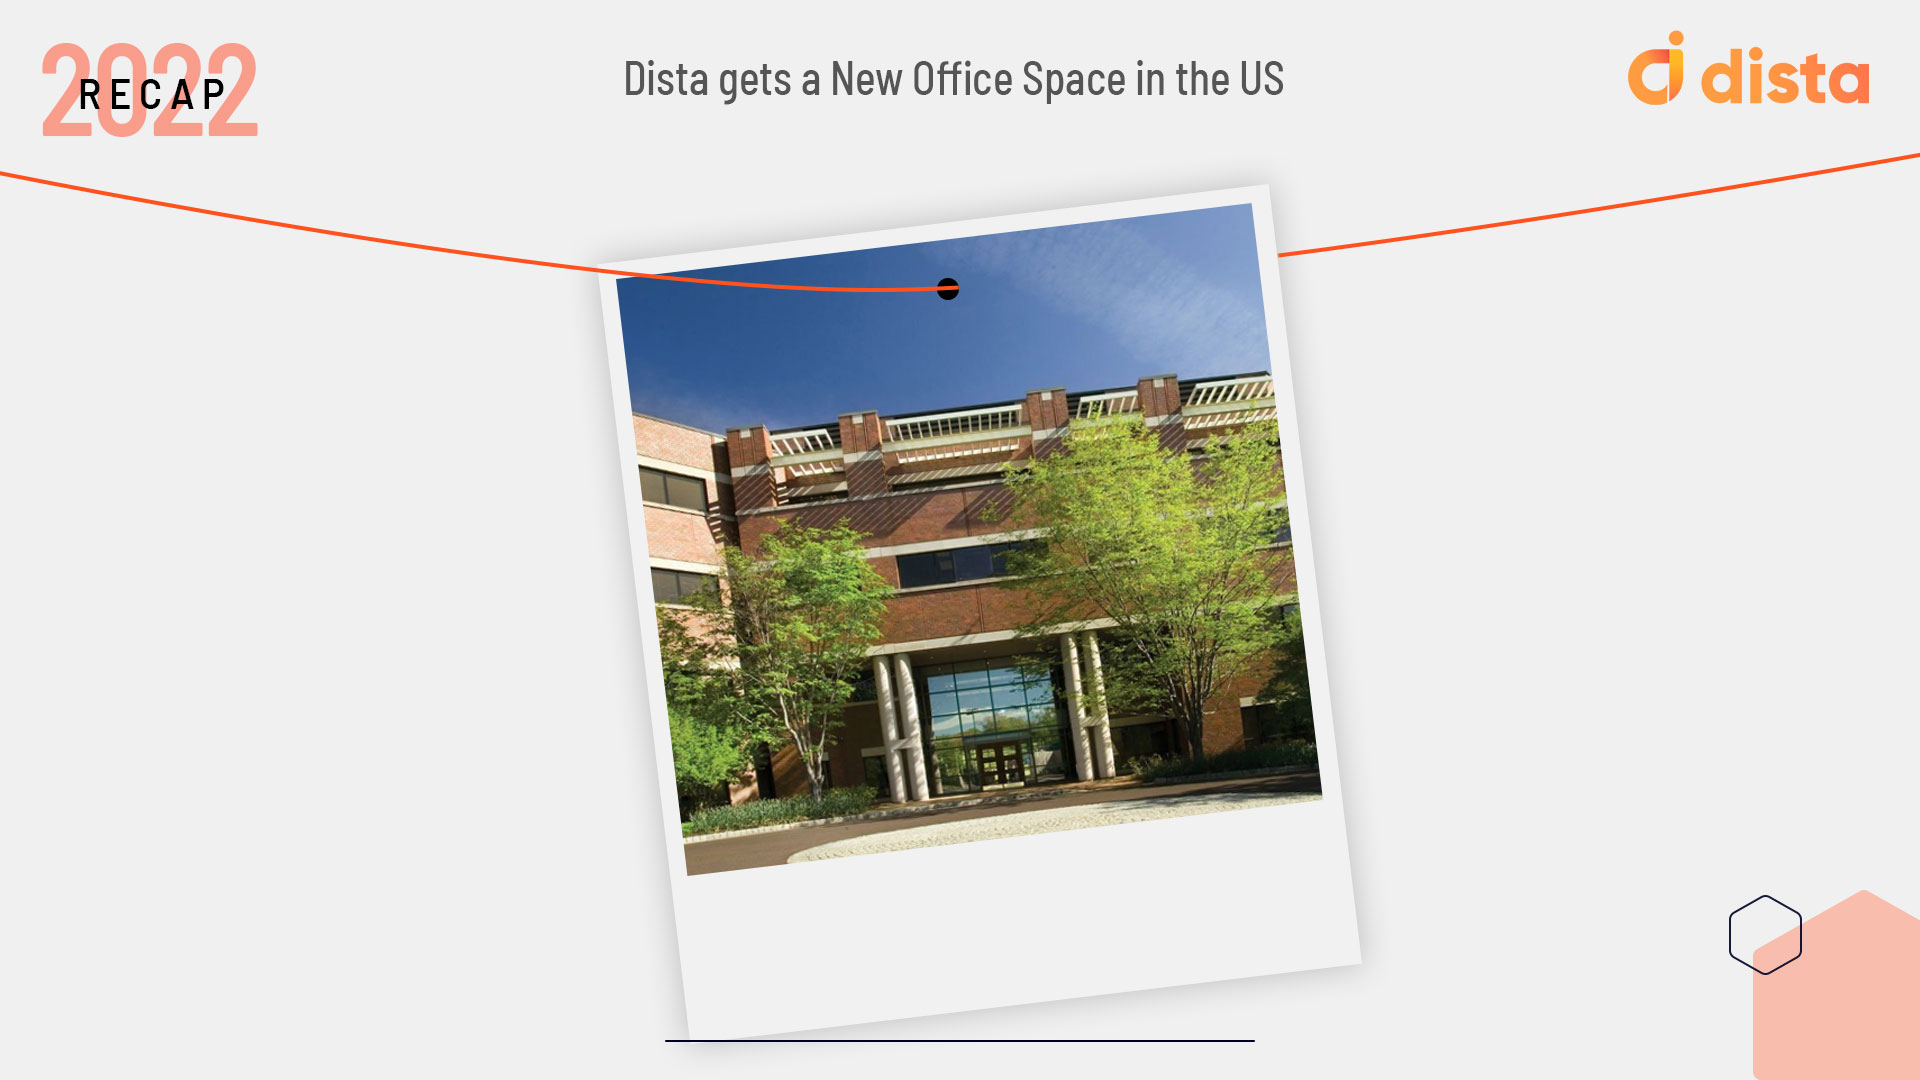 Dista Gets a New Office Space in the US